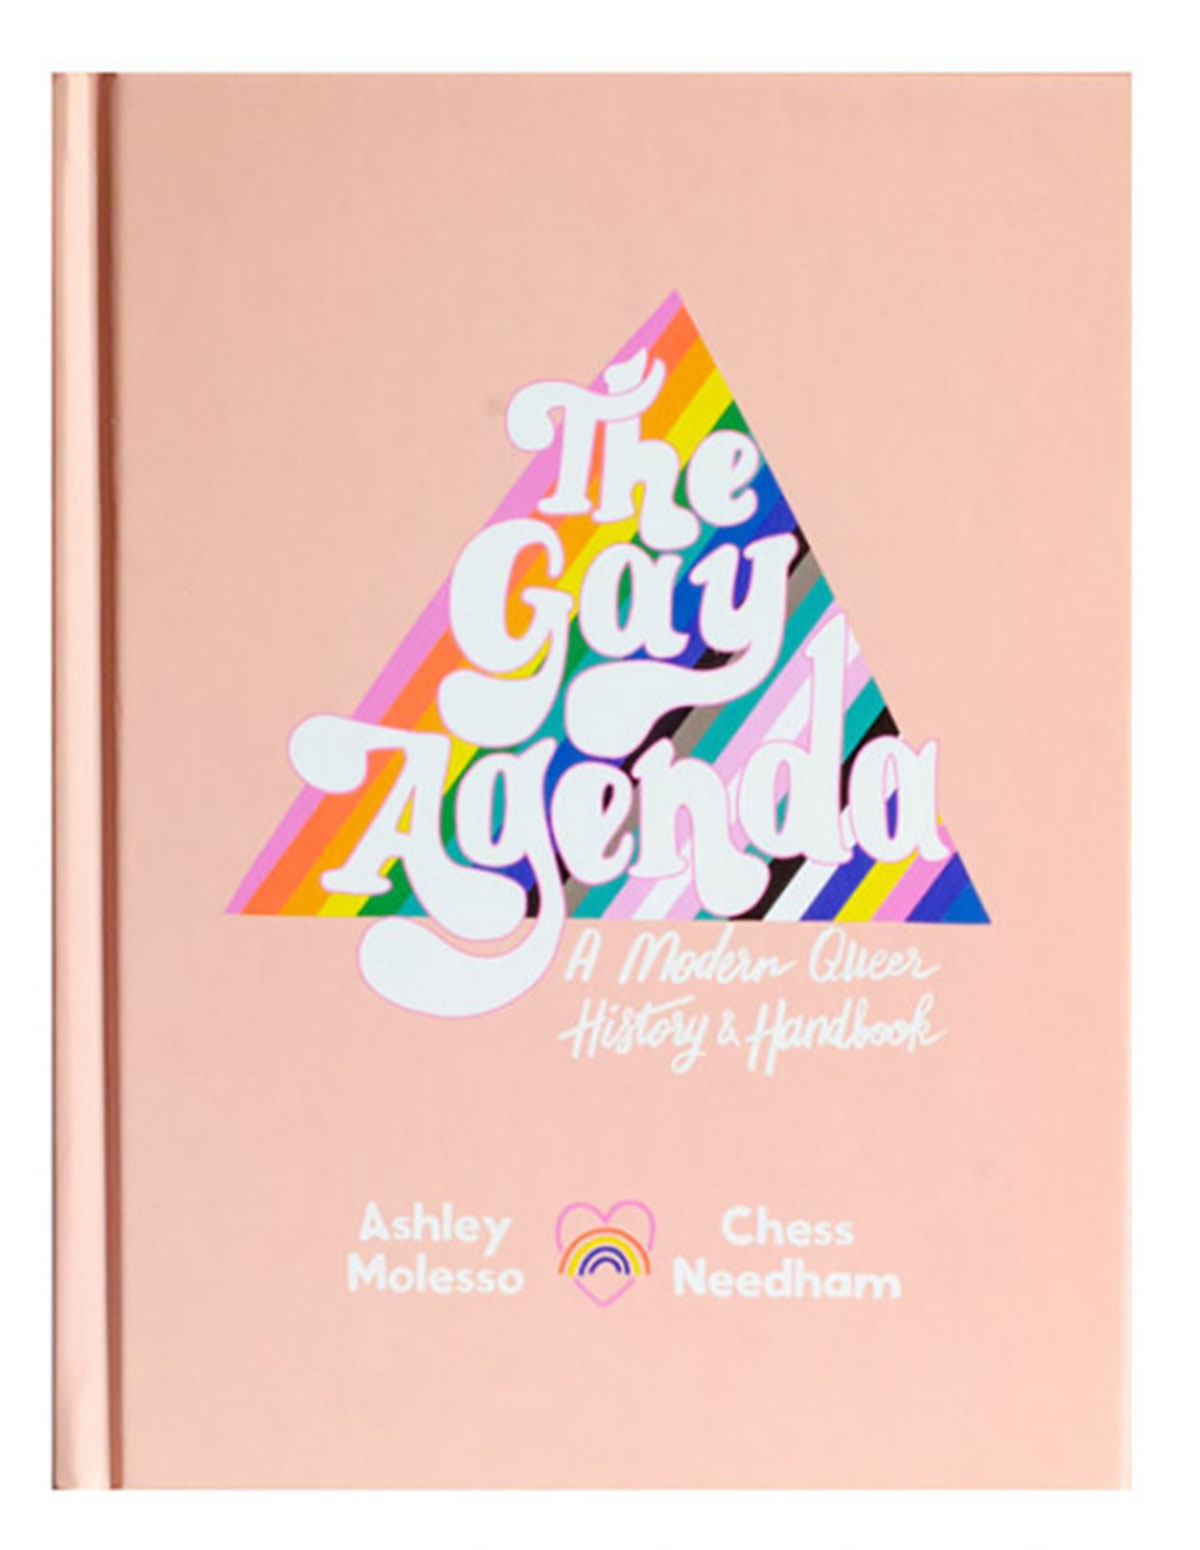 alternate image for The Gay Agenda - A Modern Queer History & Handbook